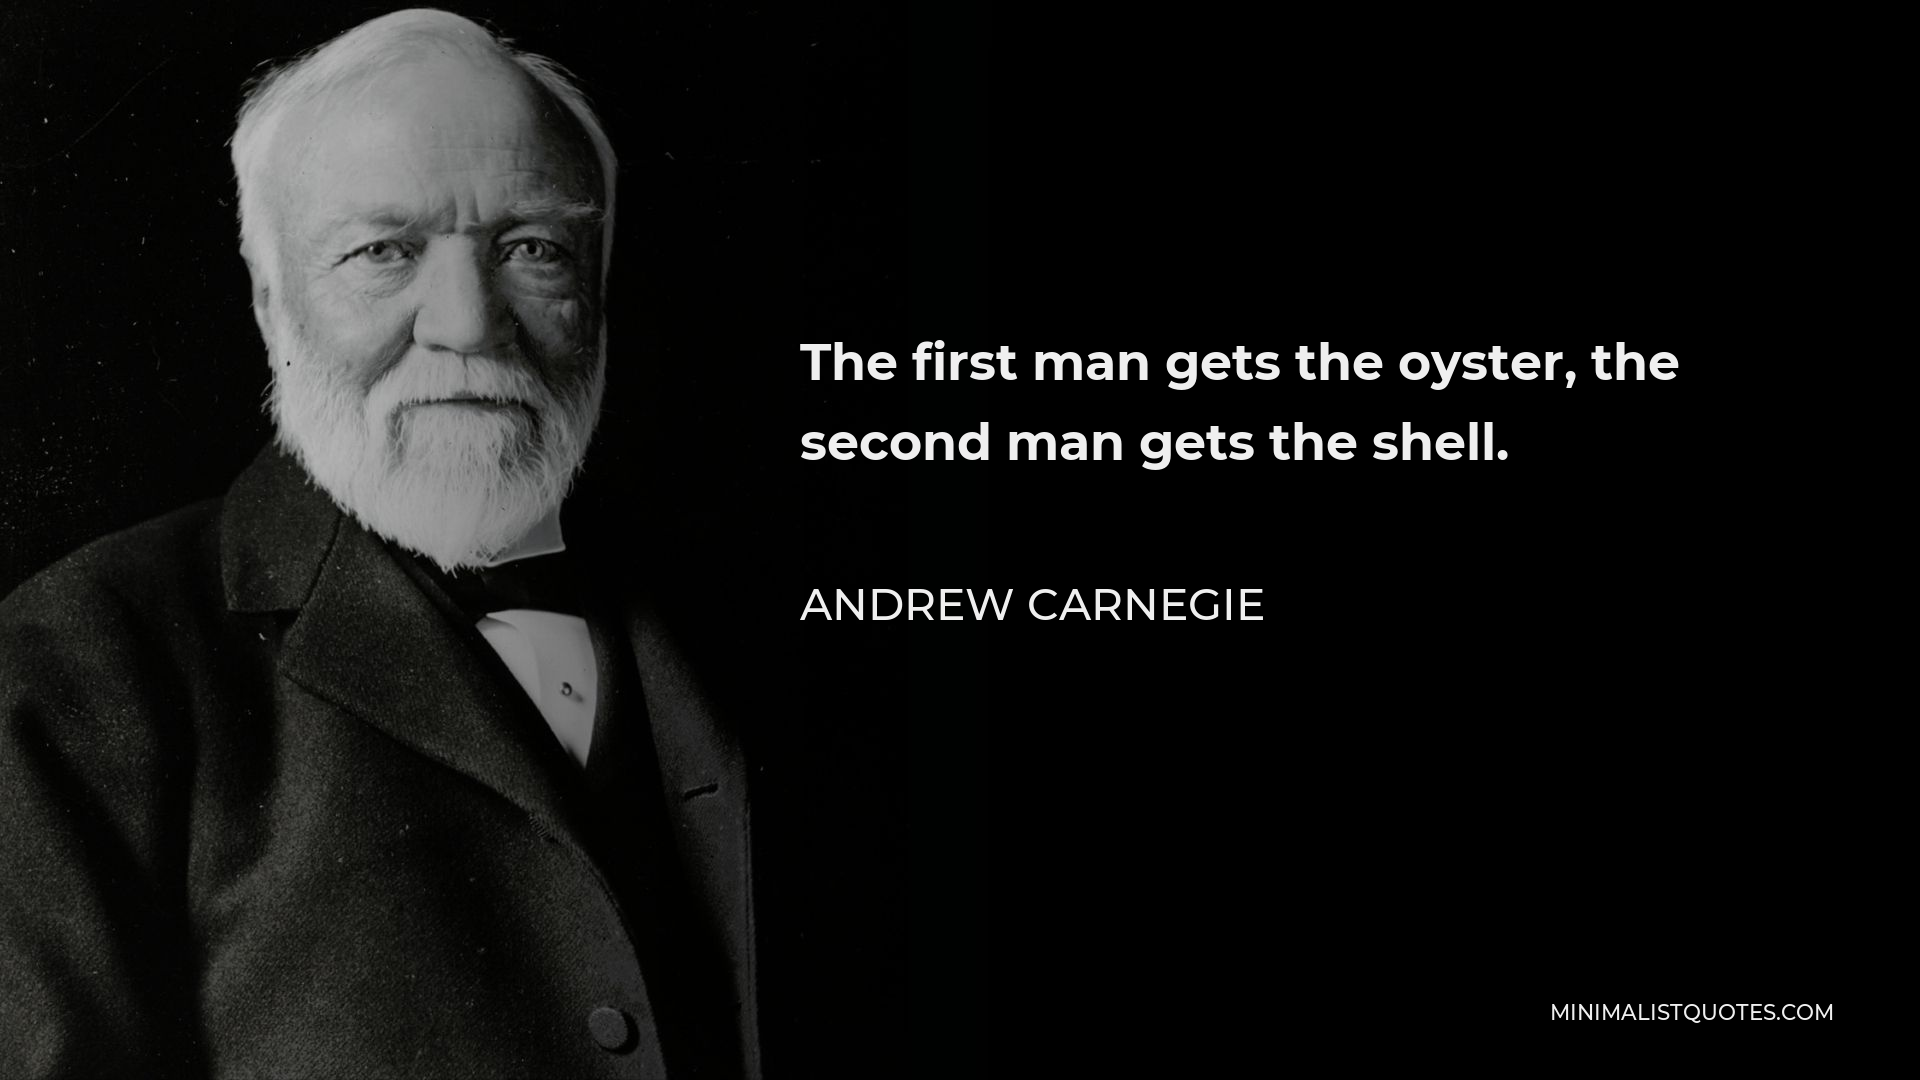 Andrew Carnegie Quote - The first man gets the oyster, the second man gets the shell.